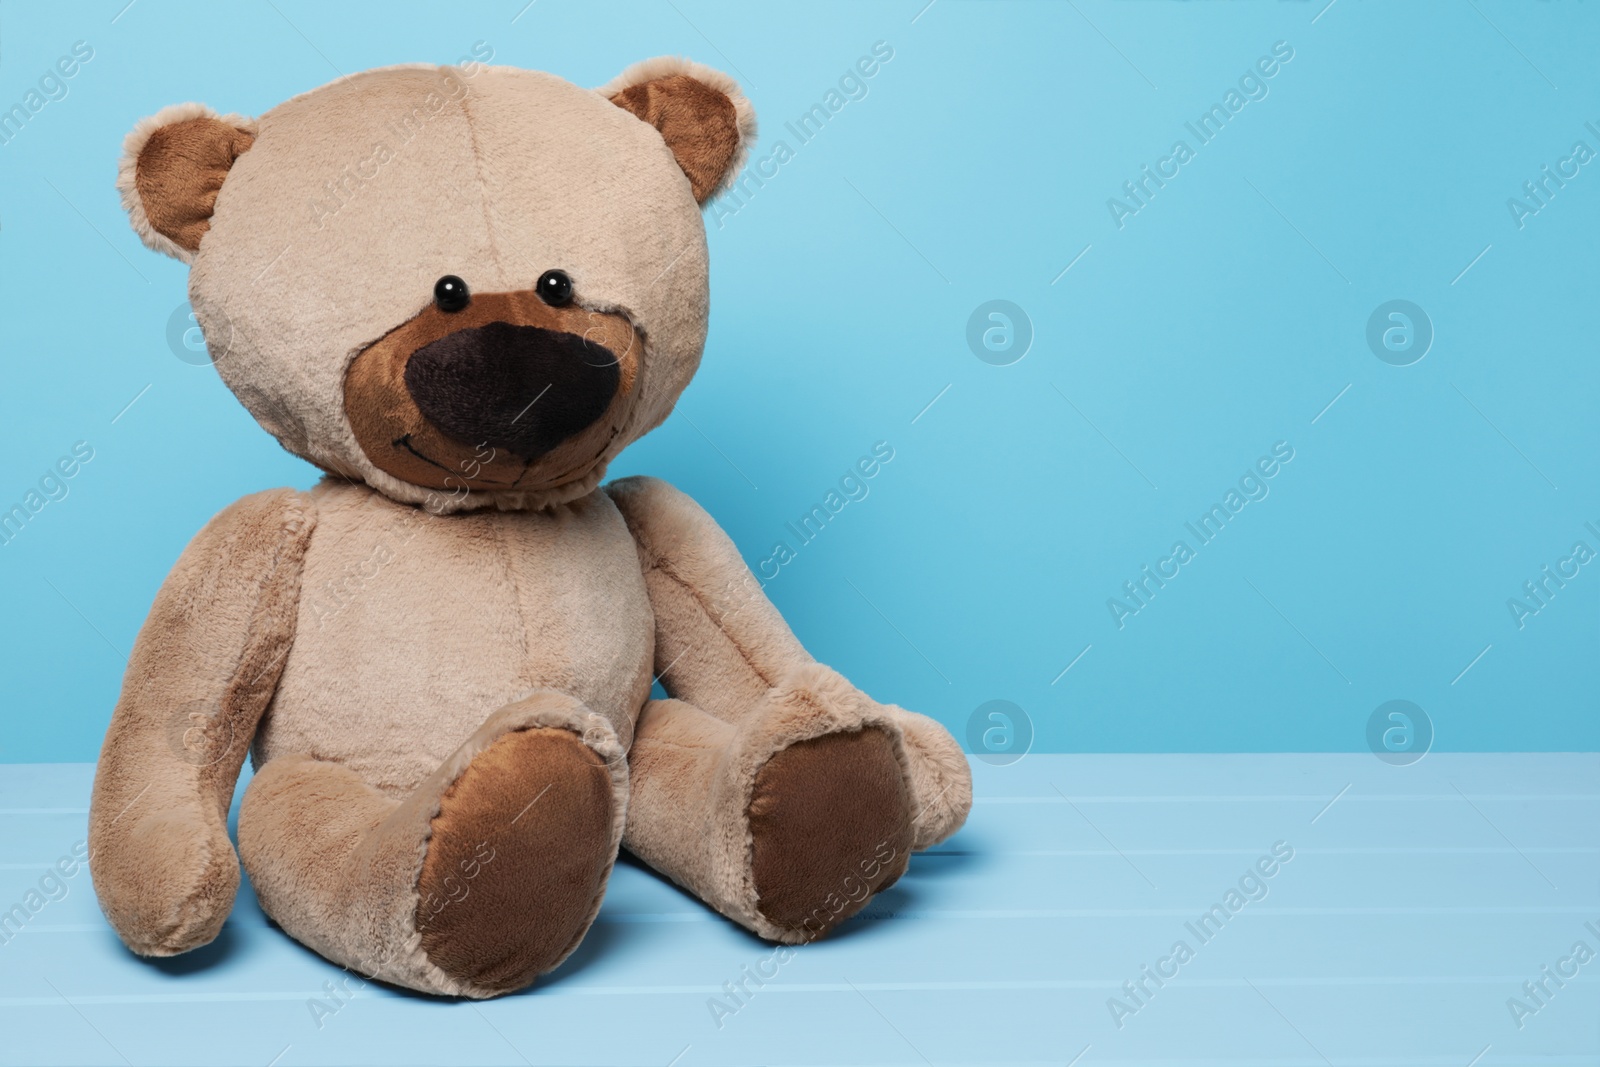 Photo of Cute teddy bear on wooden table against light blue background, space for text